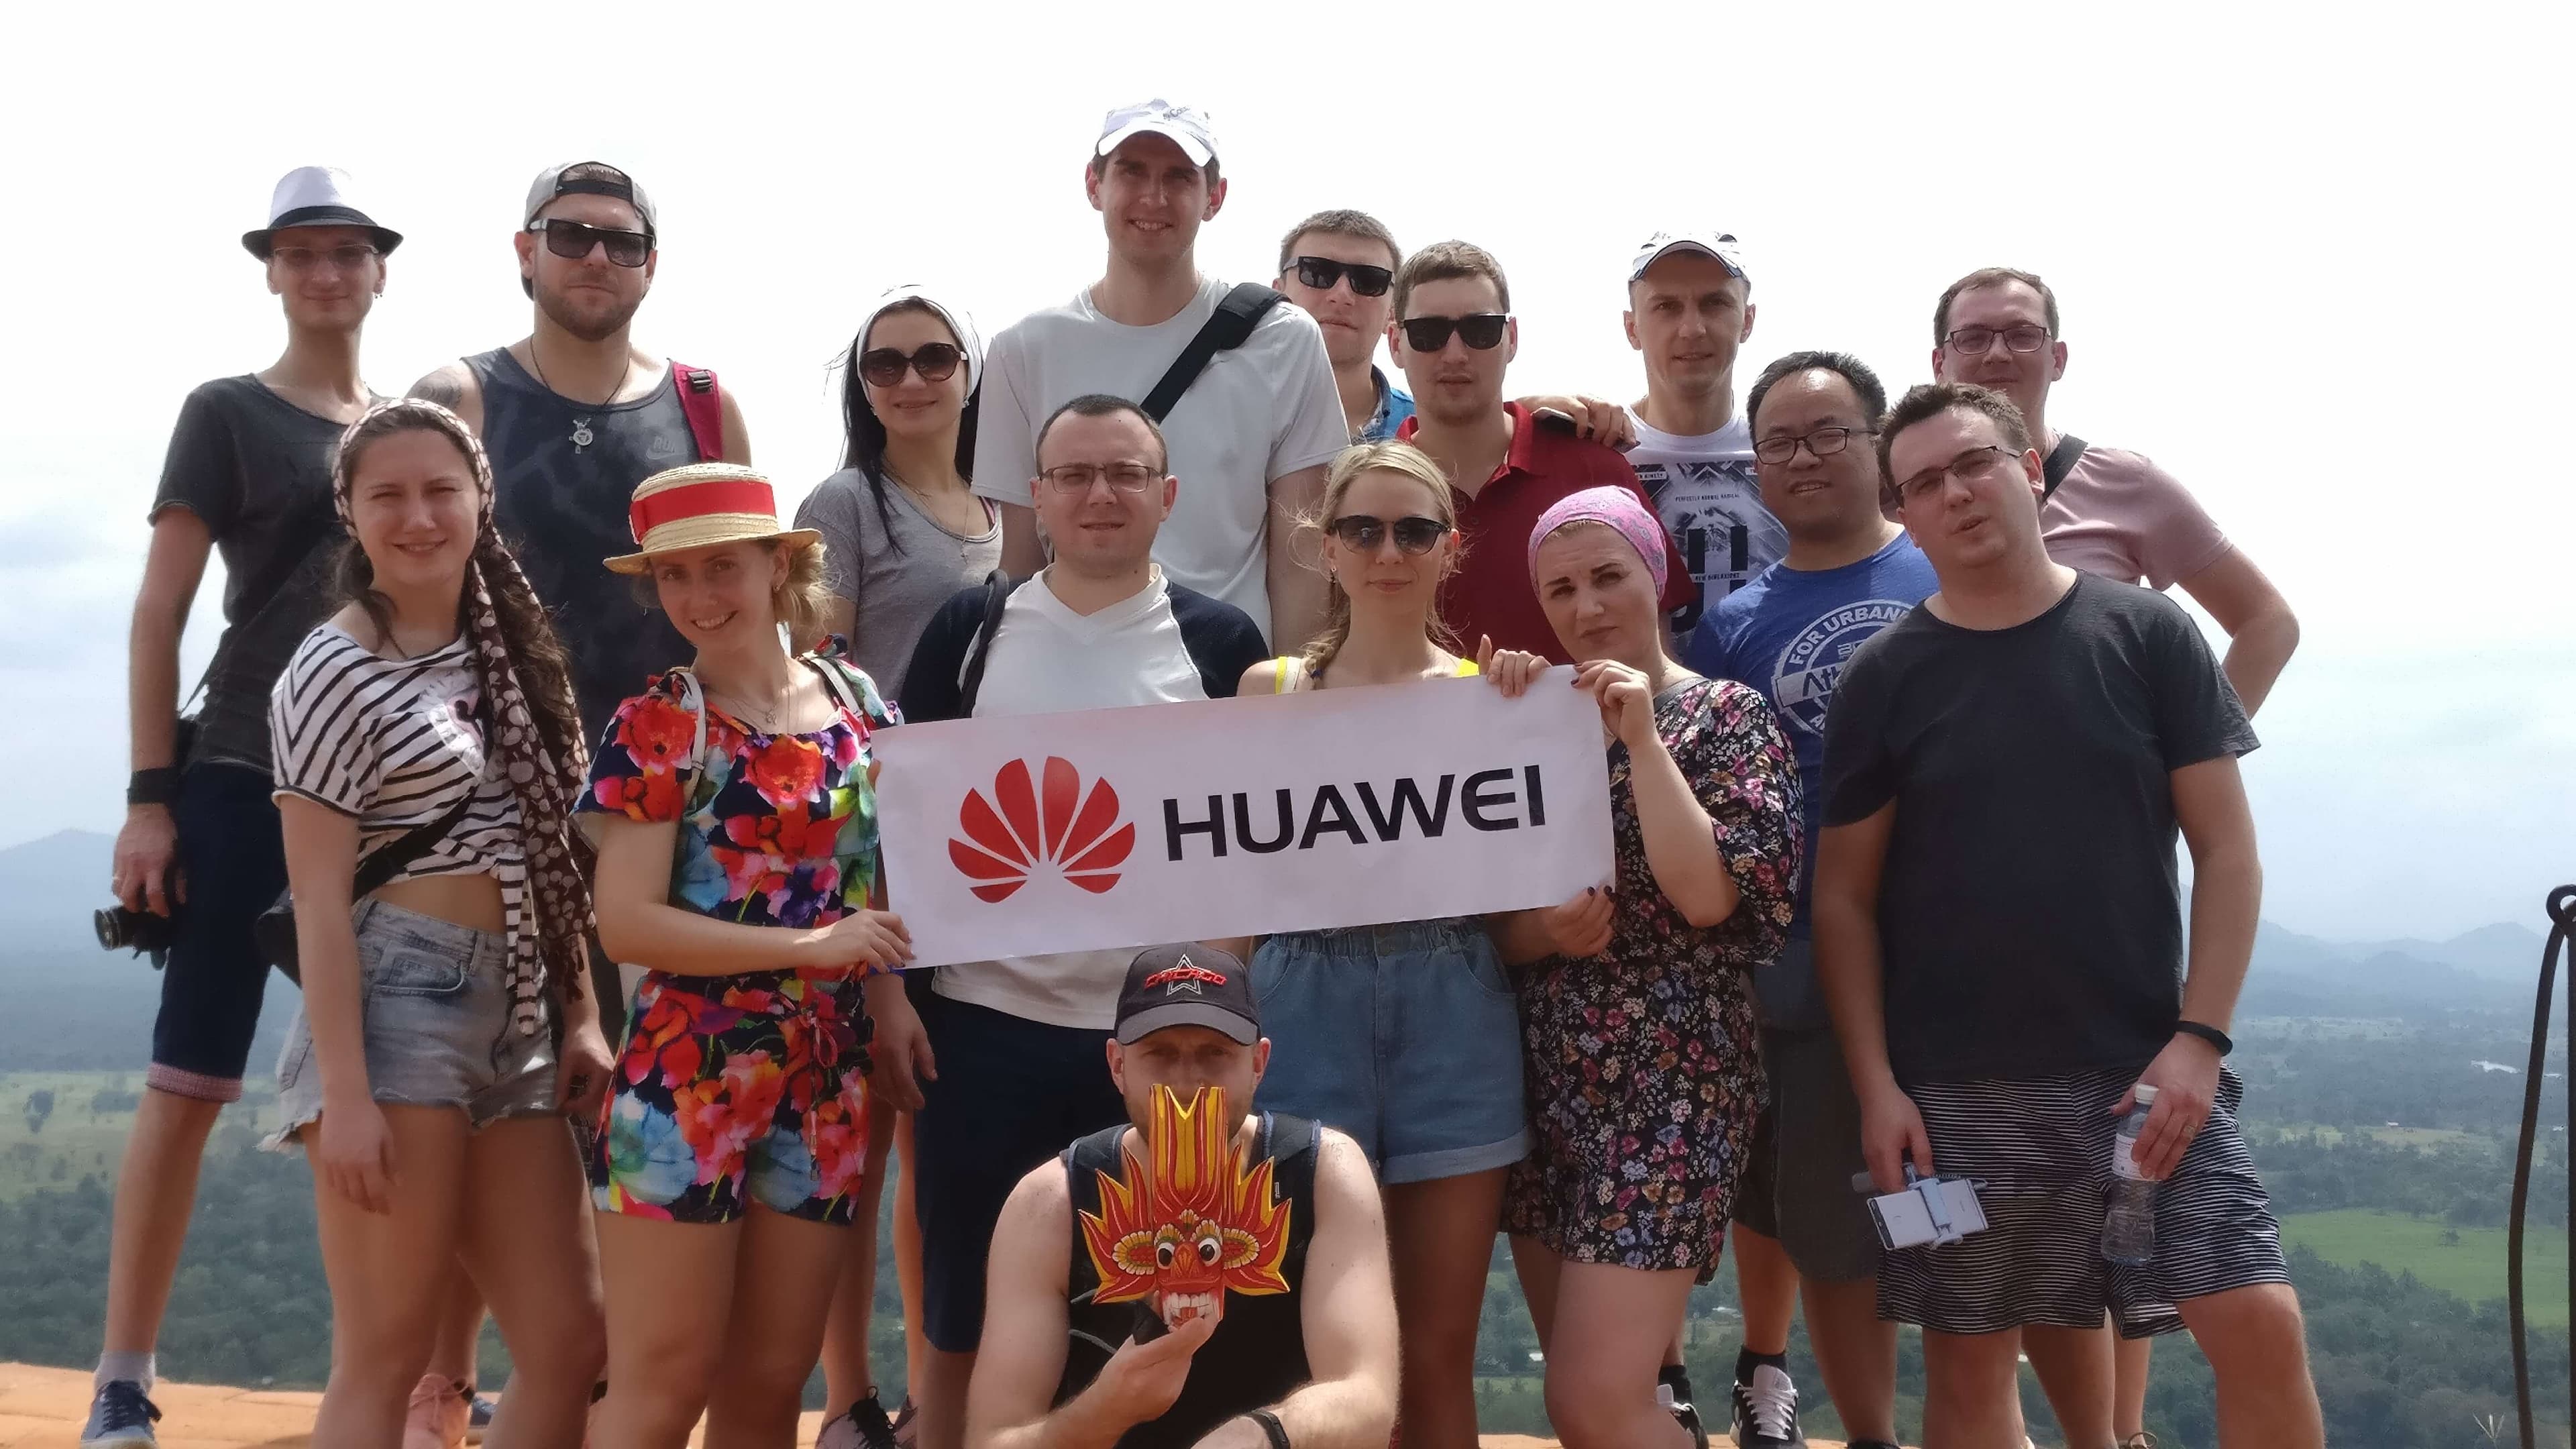 Huawei sponsored incentive holiday to boost team's moral.